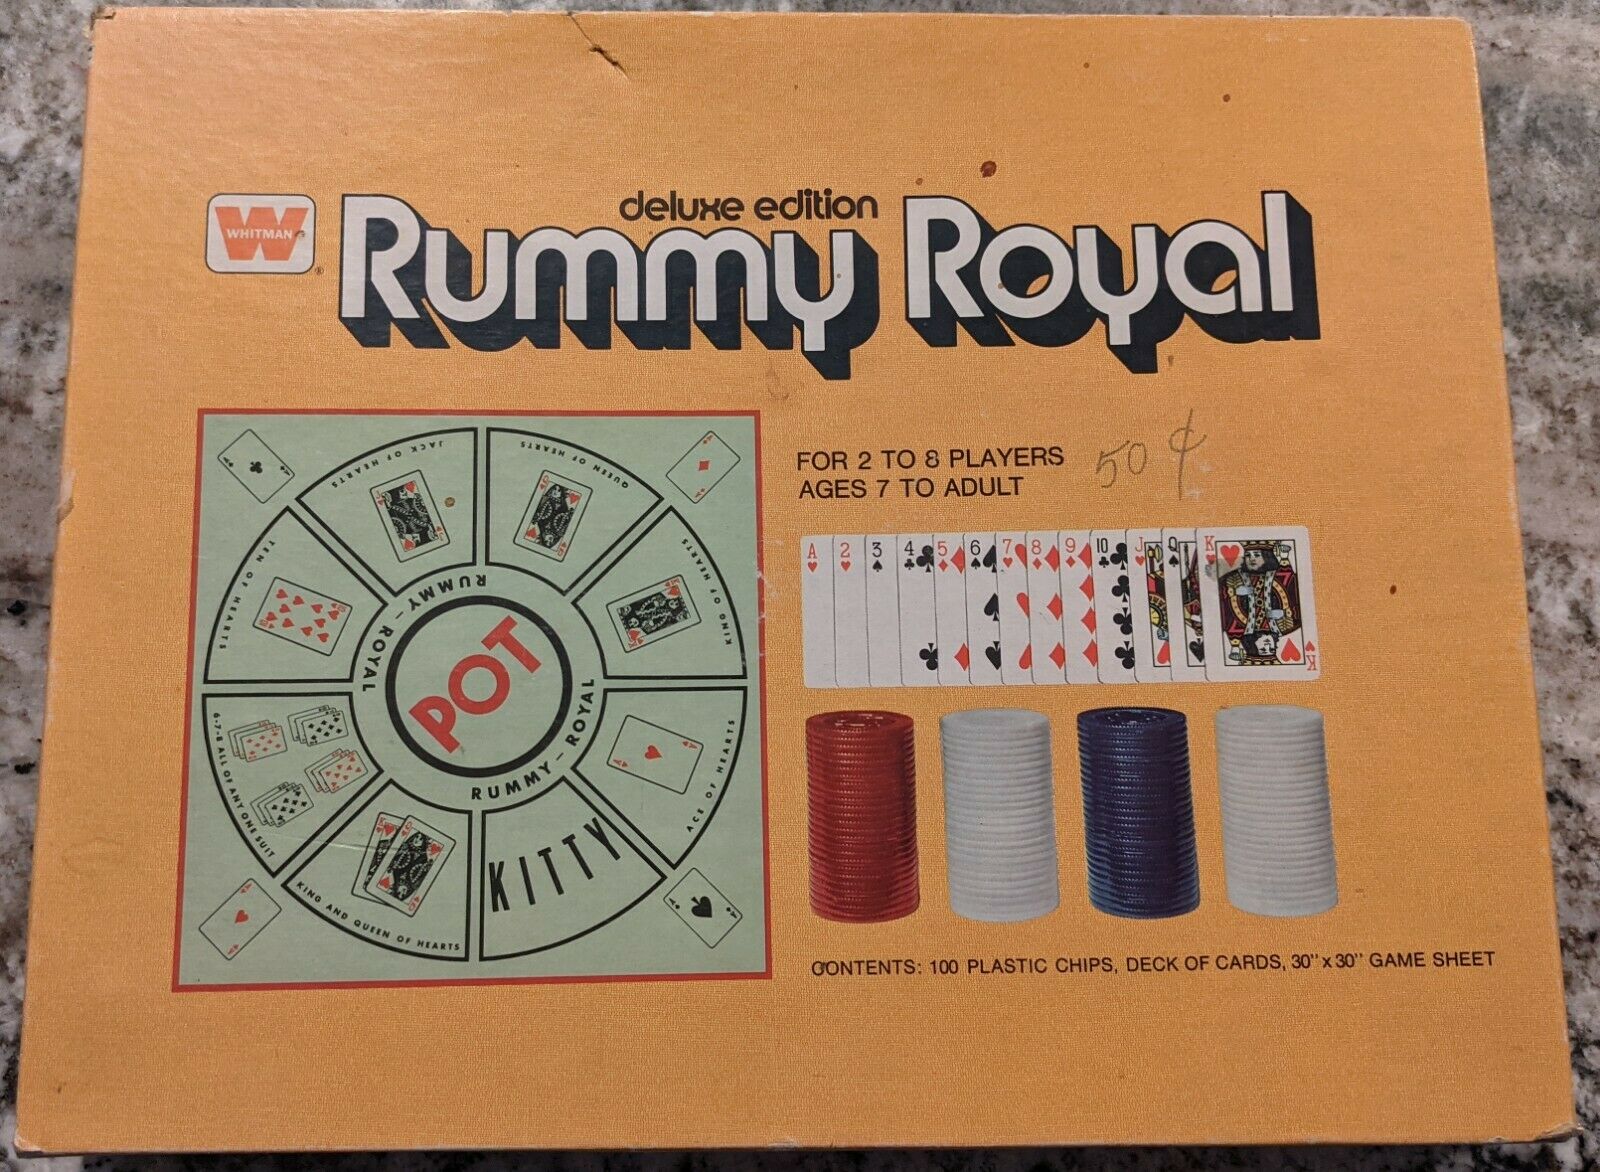 Whitman Deluxe Edition Rummy Royal 1975 Western Publishing Company 4804